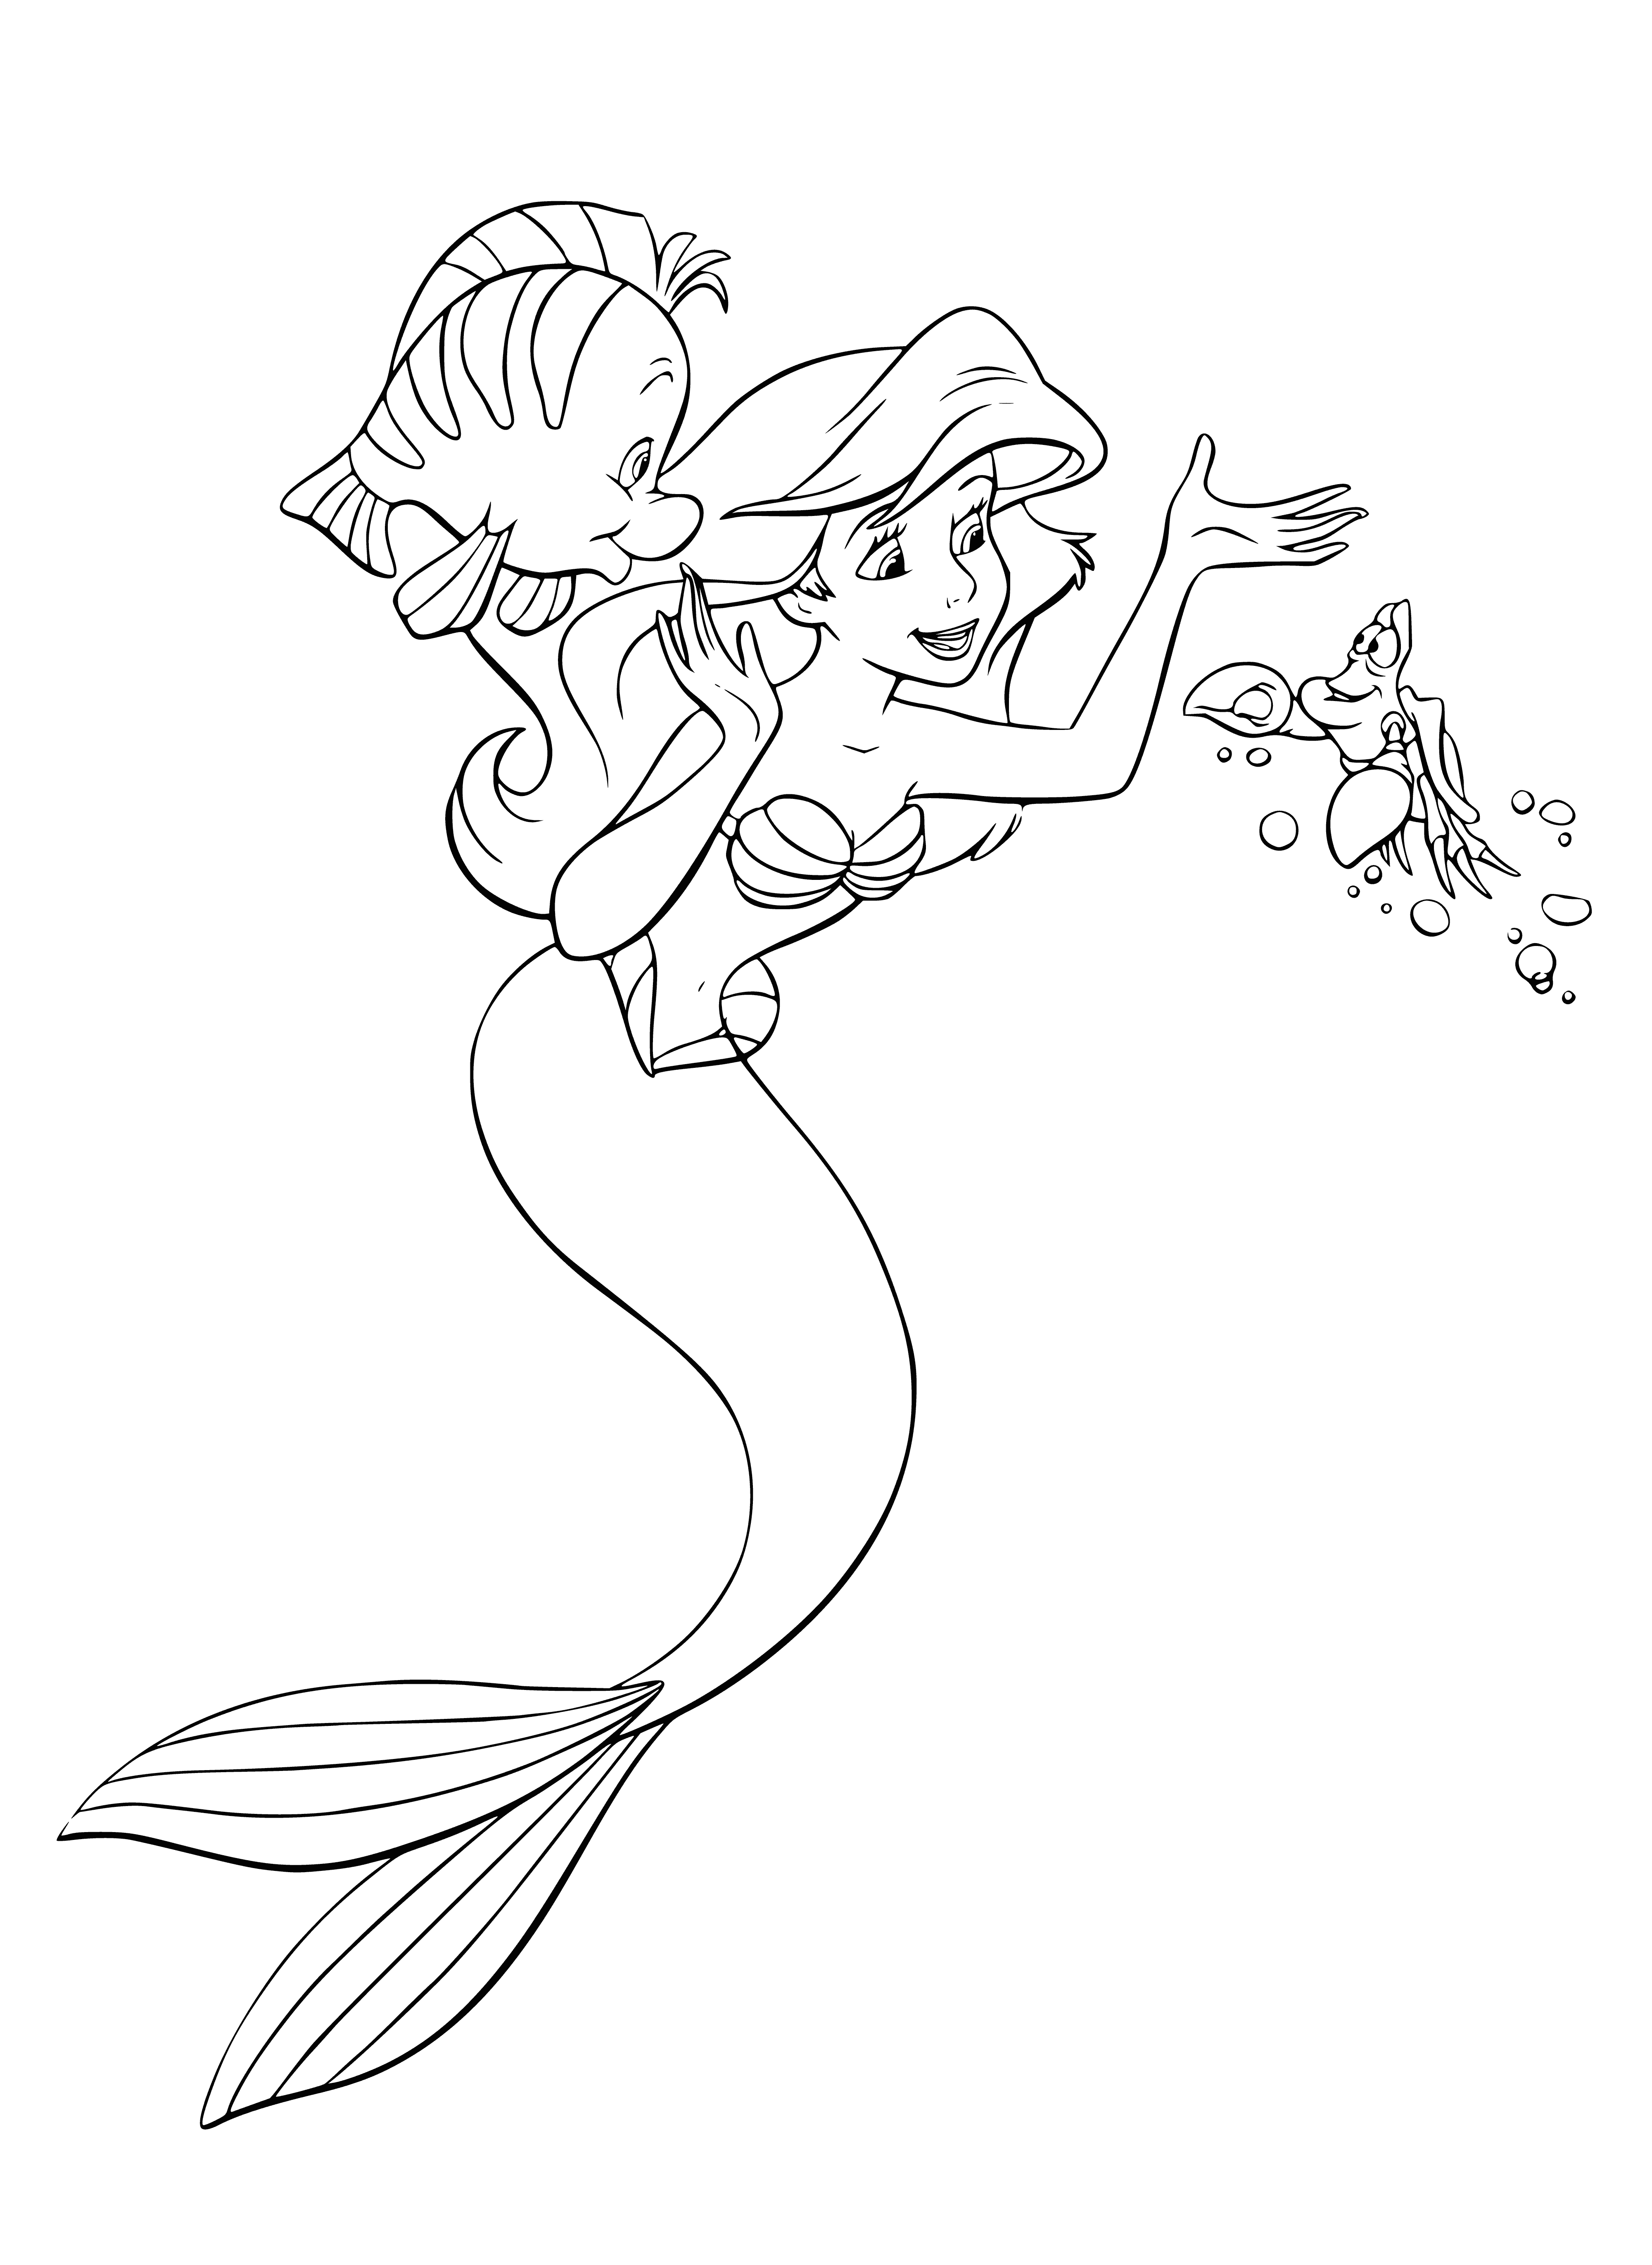 Ariel the little mermaid, Flounder fish and Sebastian the crab coloring page